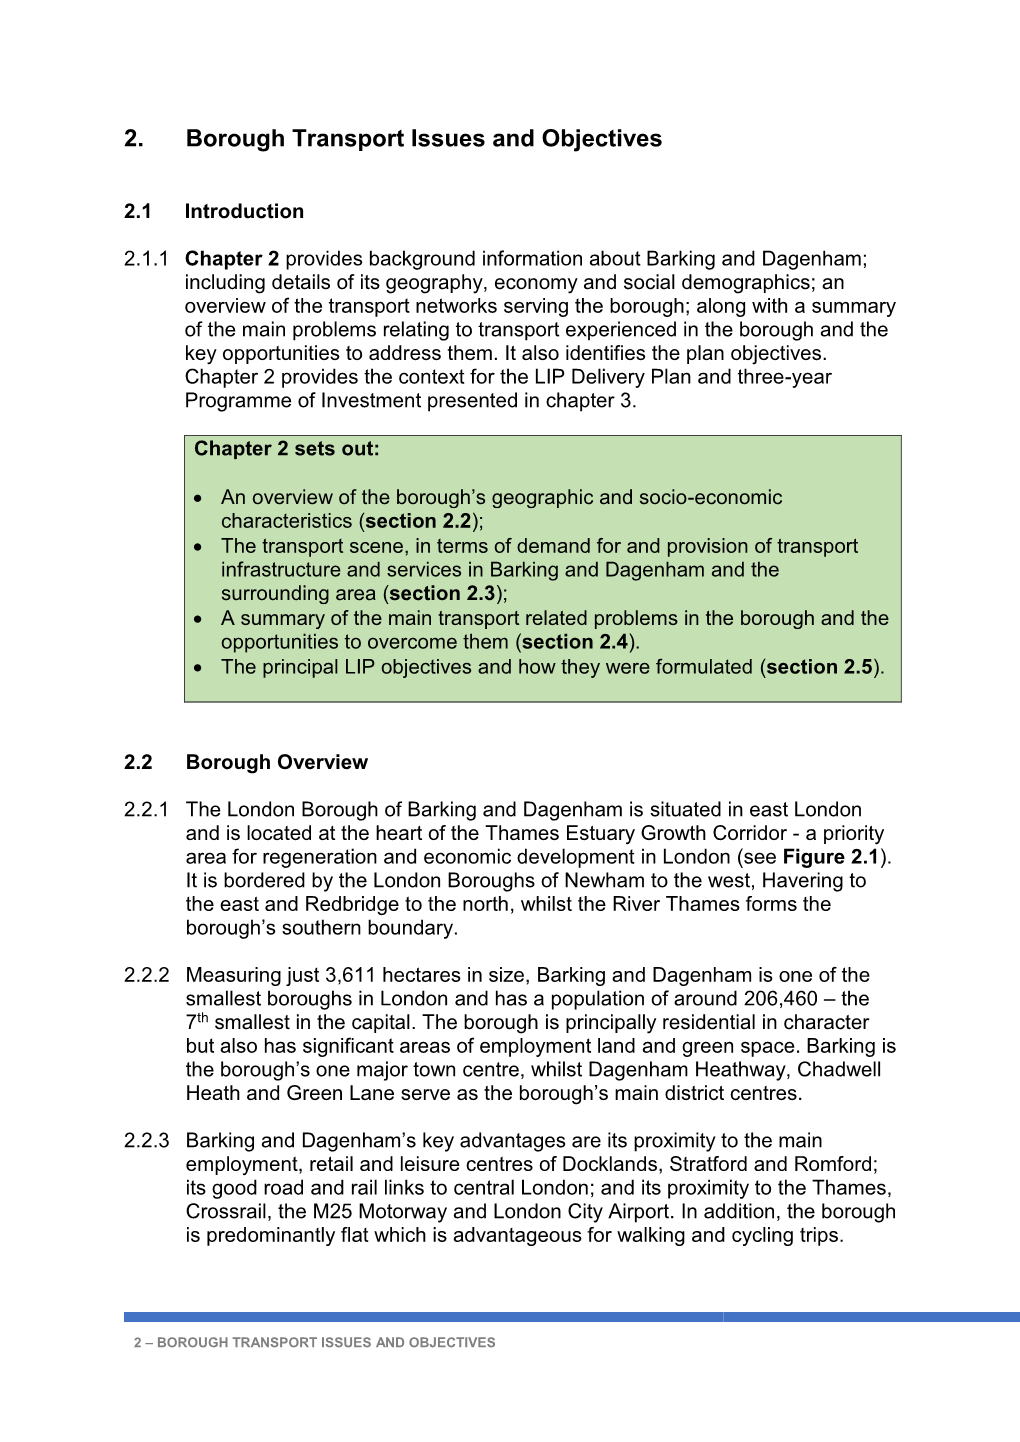 2. Borough Transport Issues and Objectives